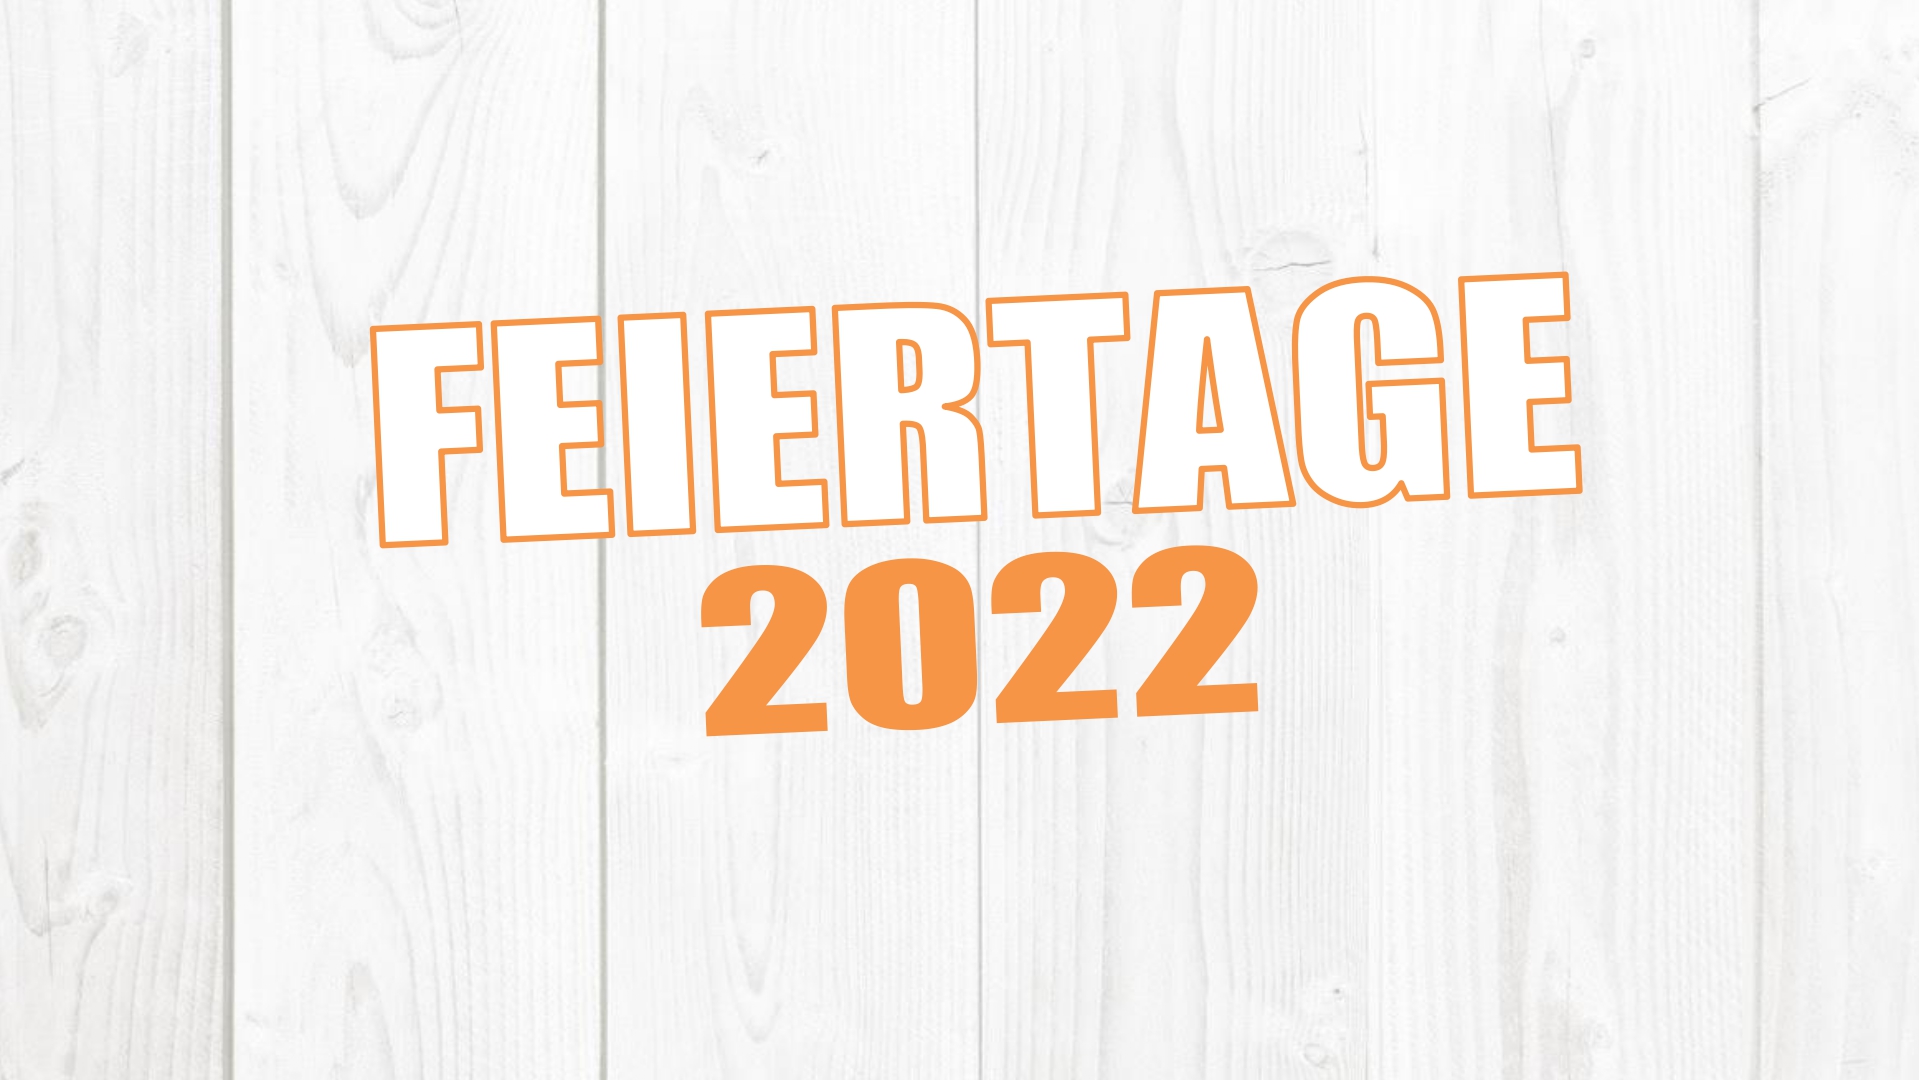 Feiertage 2022_page-0001